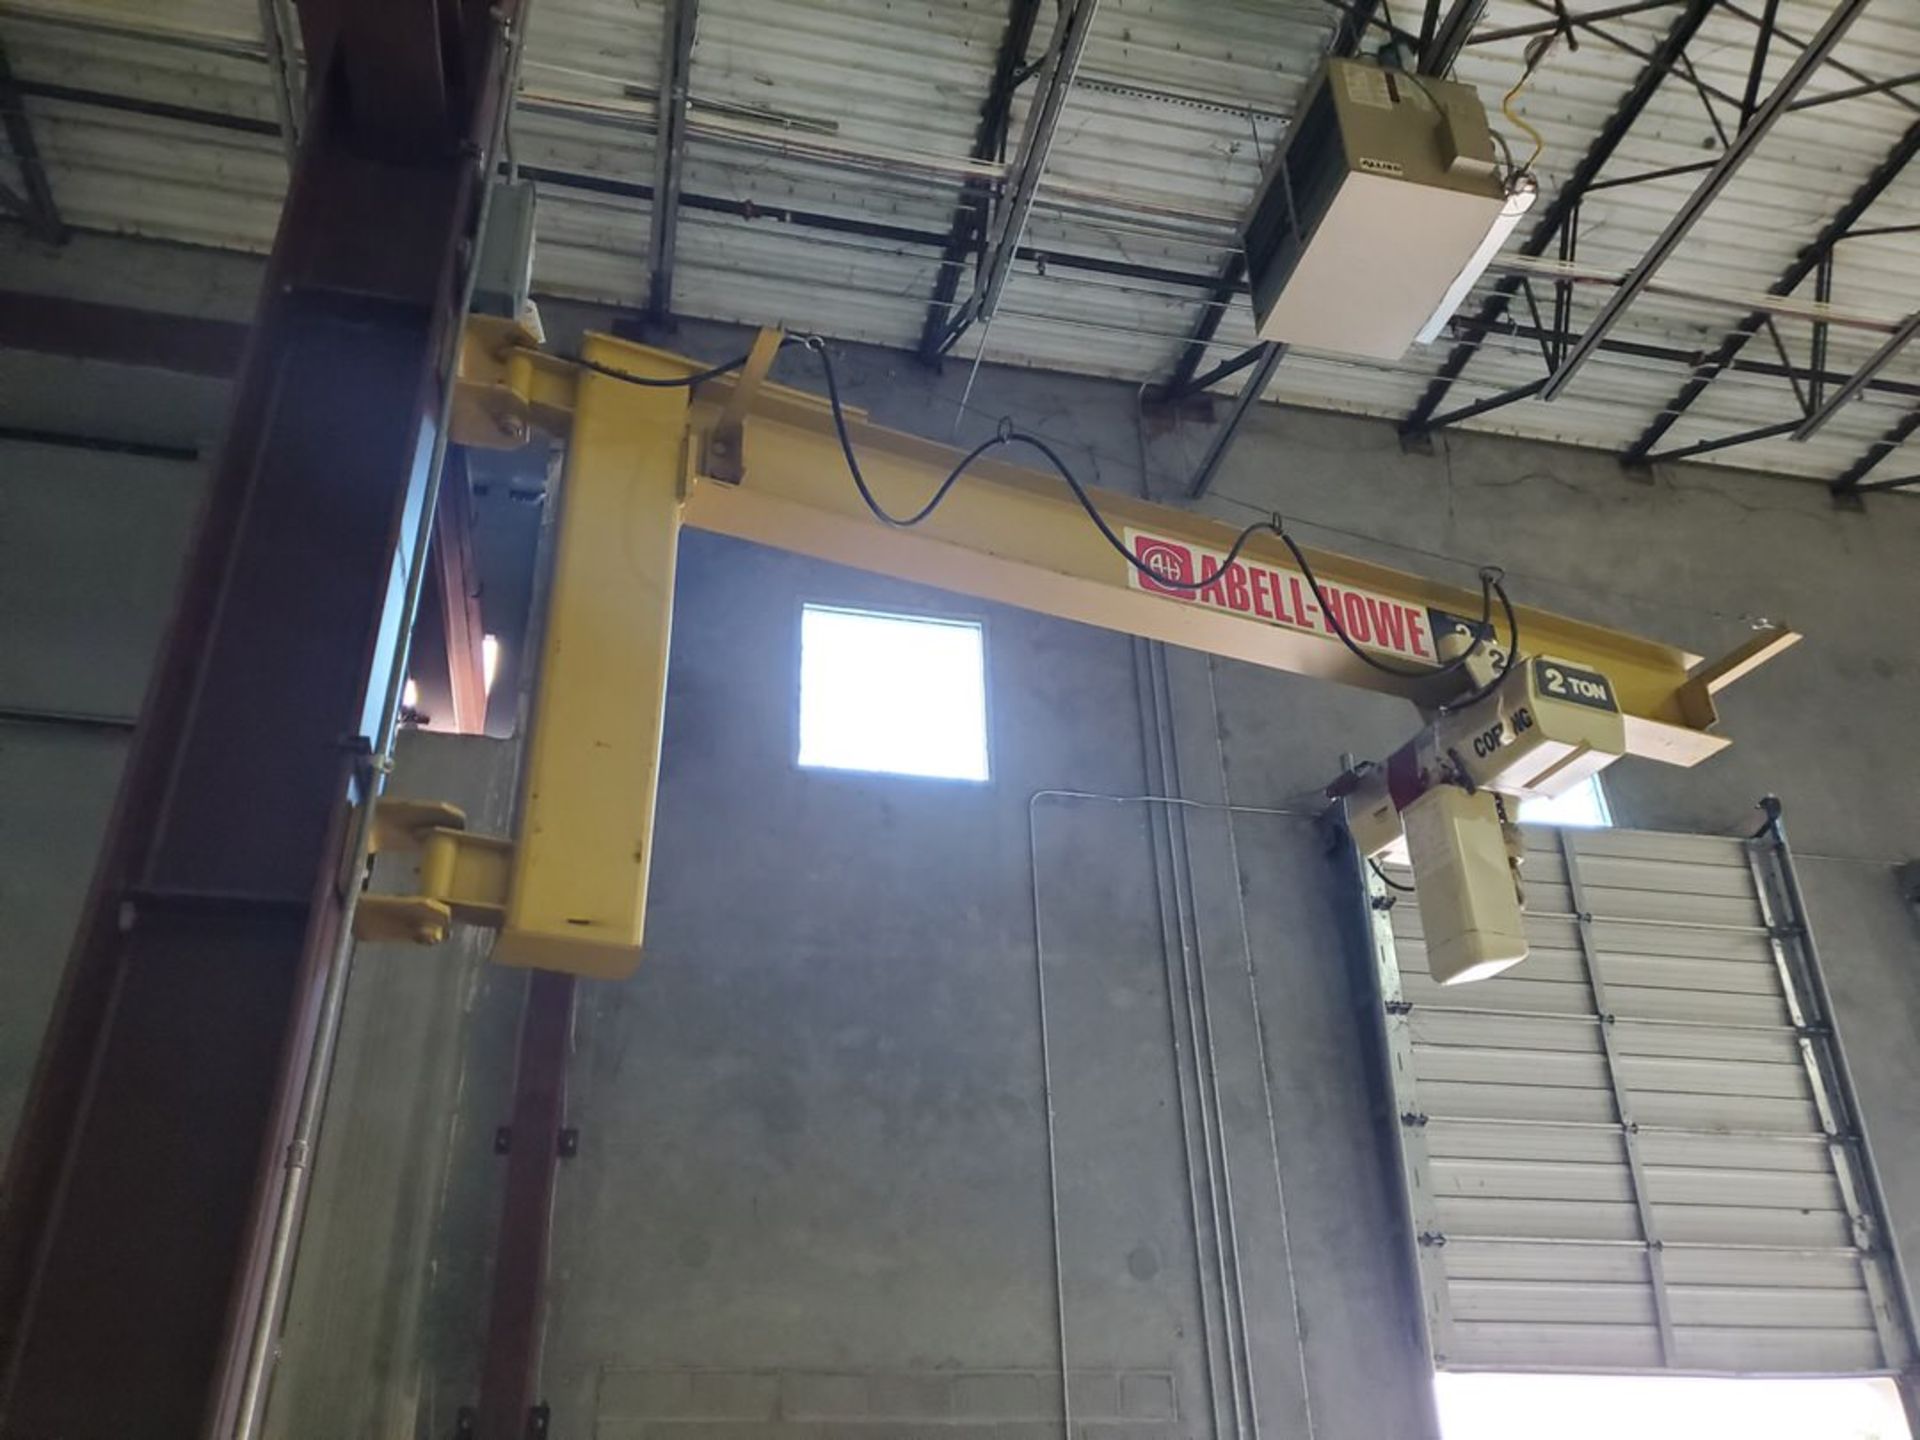 Abbell Howe Wall Mounted 2 Ton Jib Crane w/ 2-Ton Coffing Hoist & 2-Button Pendant - Image 2 of 13